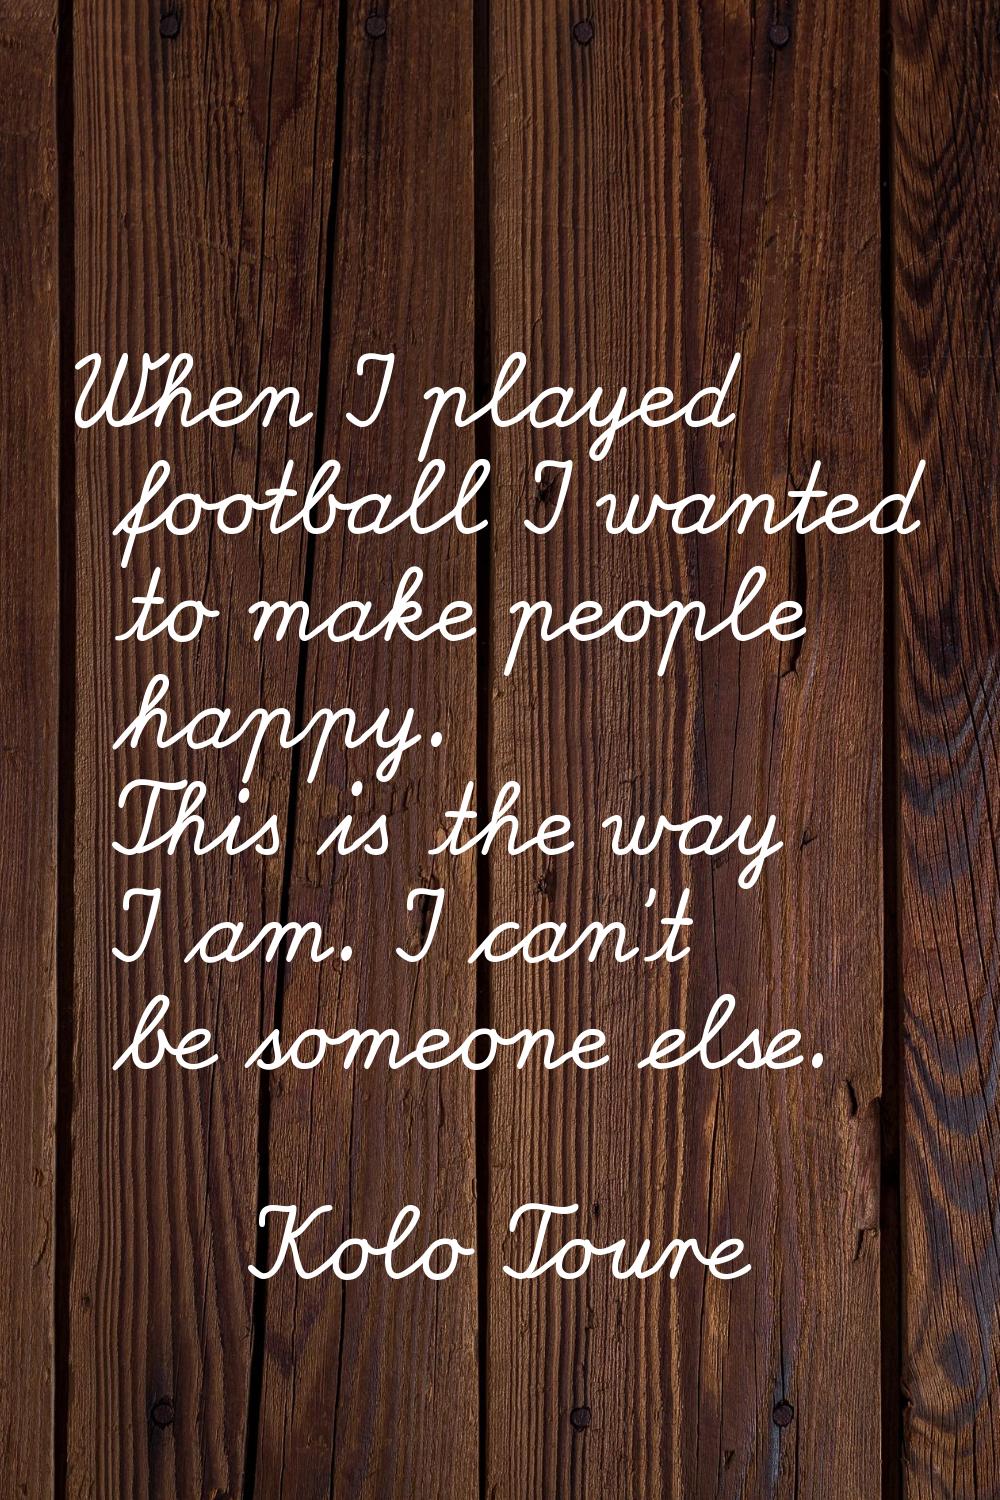 When I played football I wanted to make people happy. This is the way I am. I can't be someone else